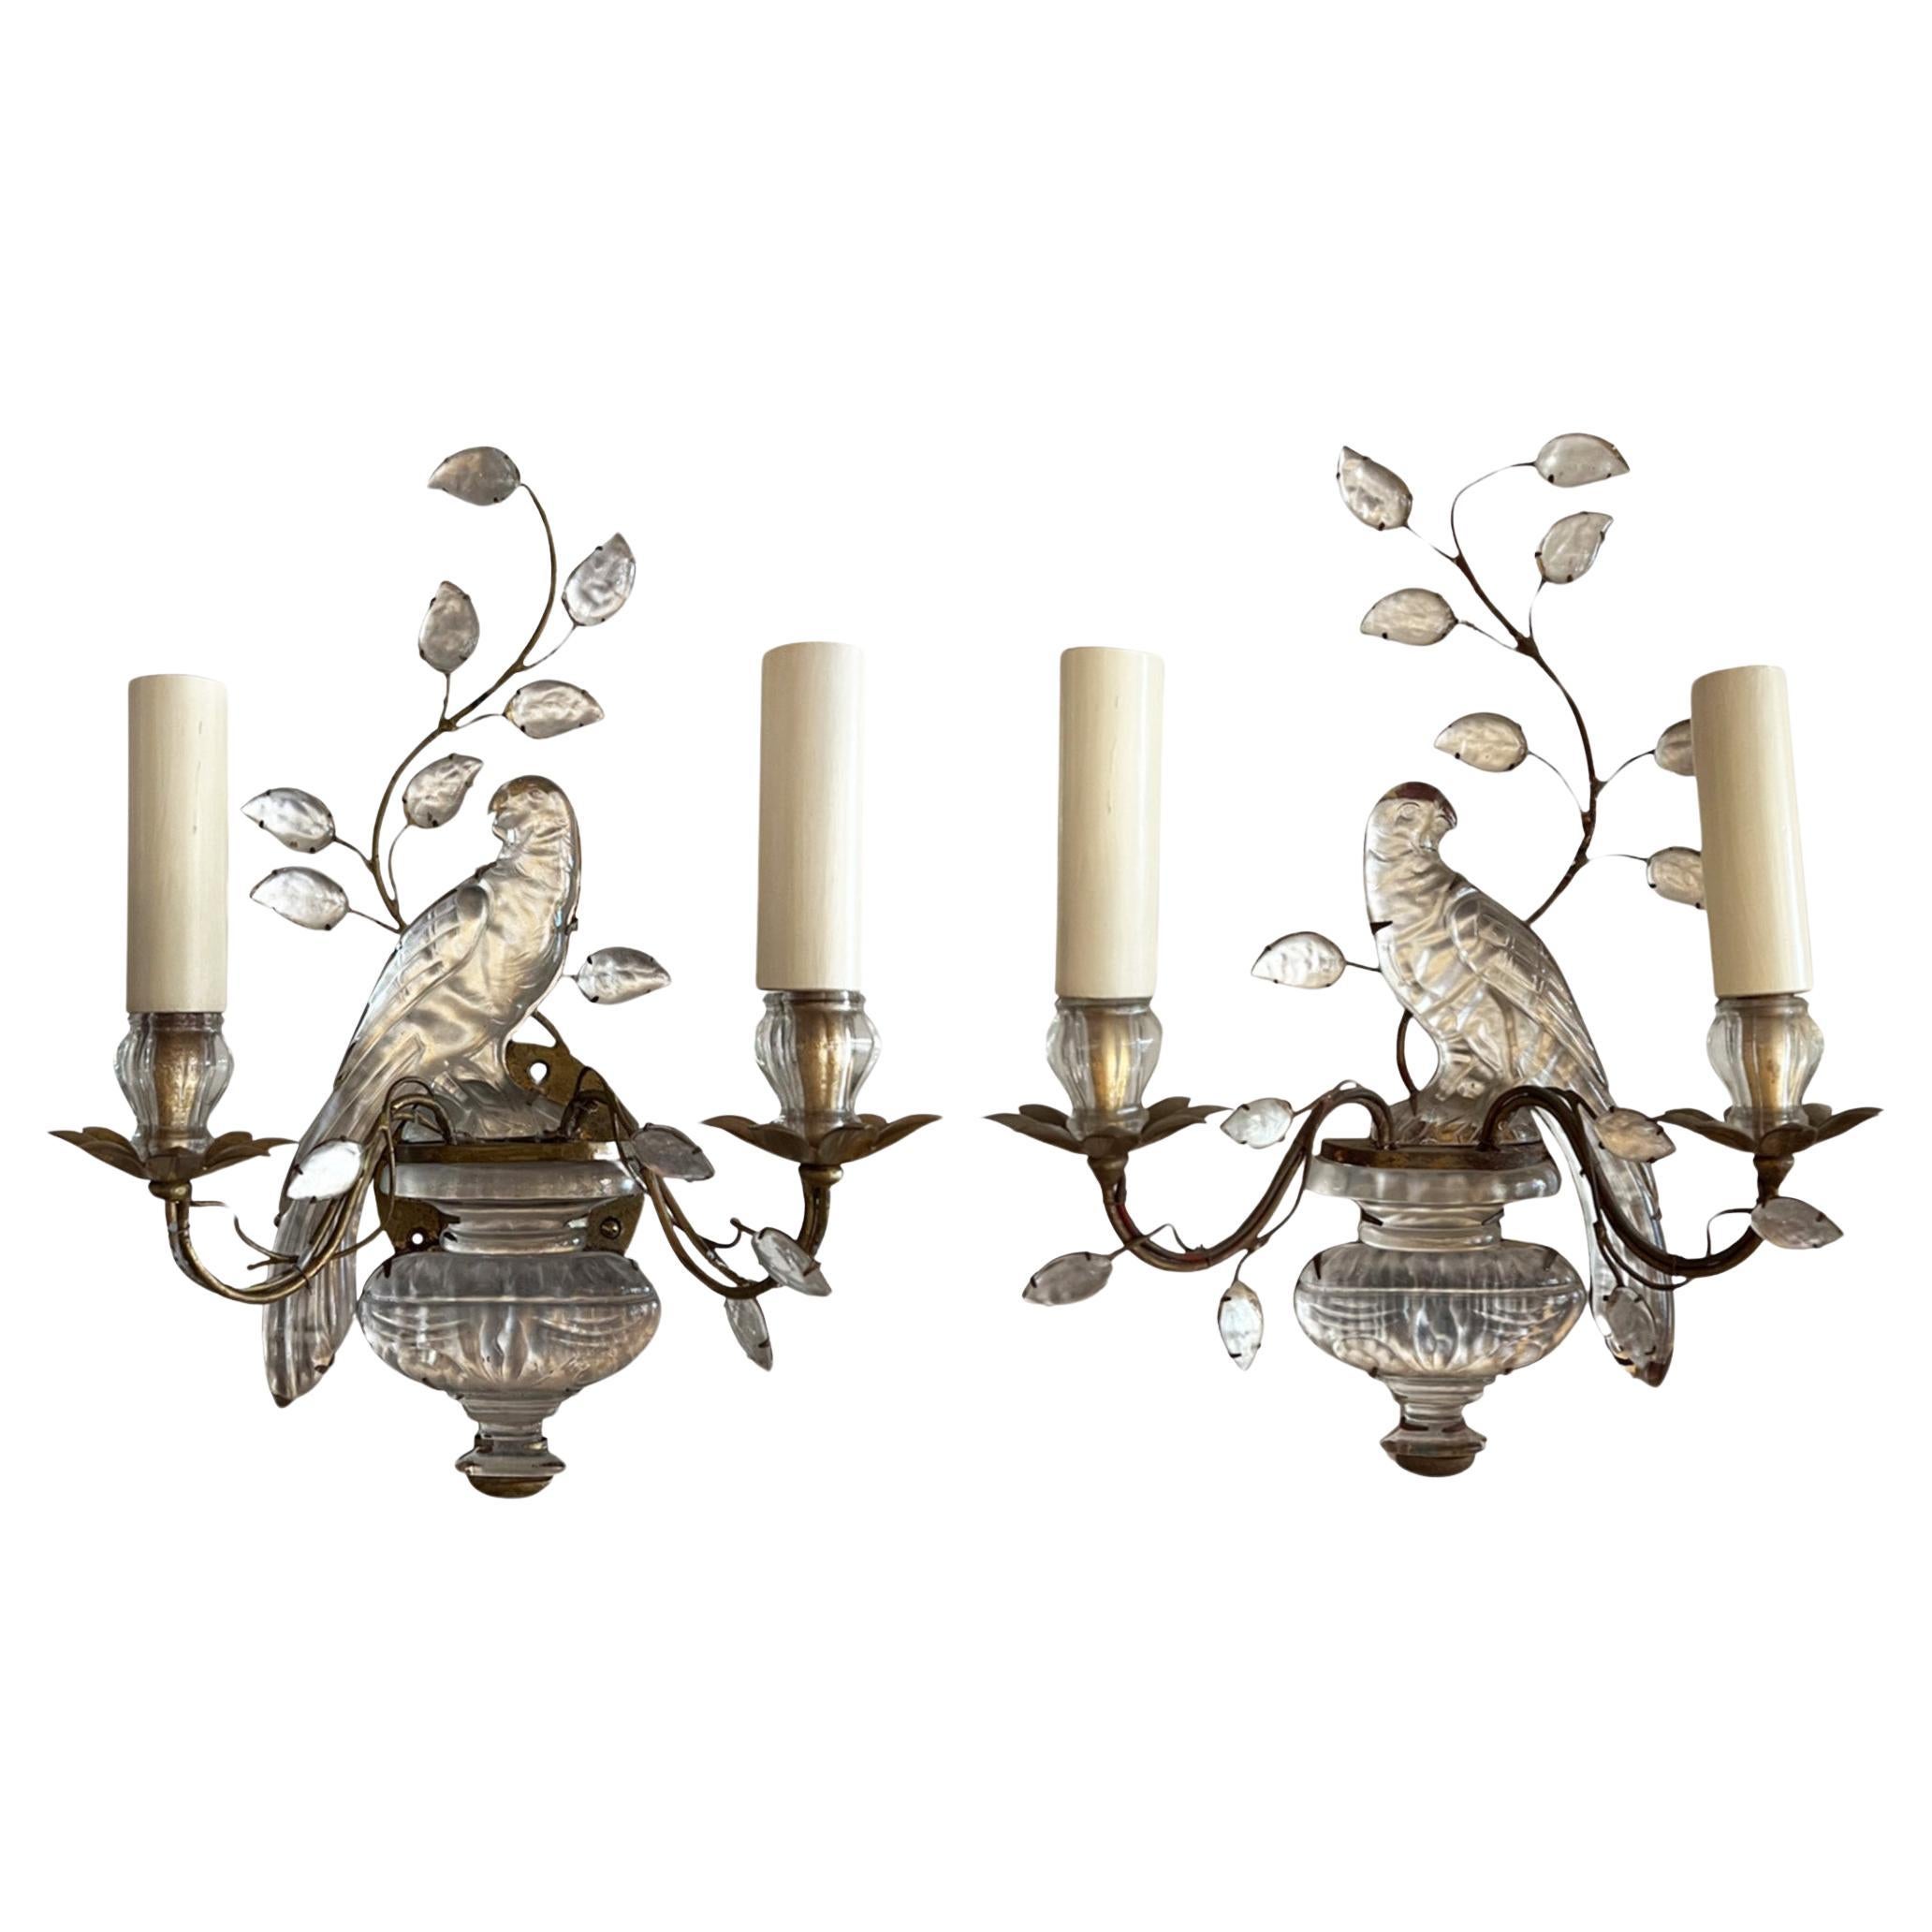 A Near Pair of Maison Baguès Wall Sconces With Urns and Parrots